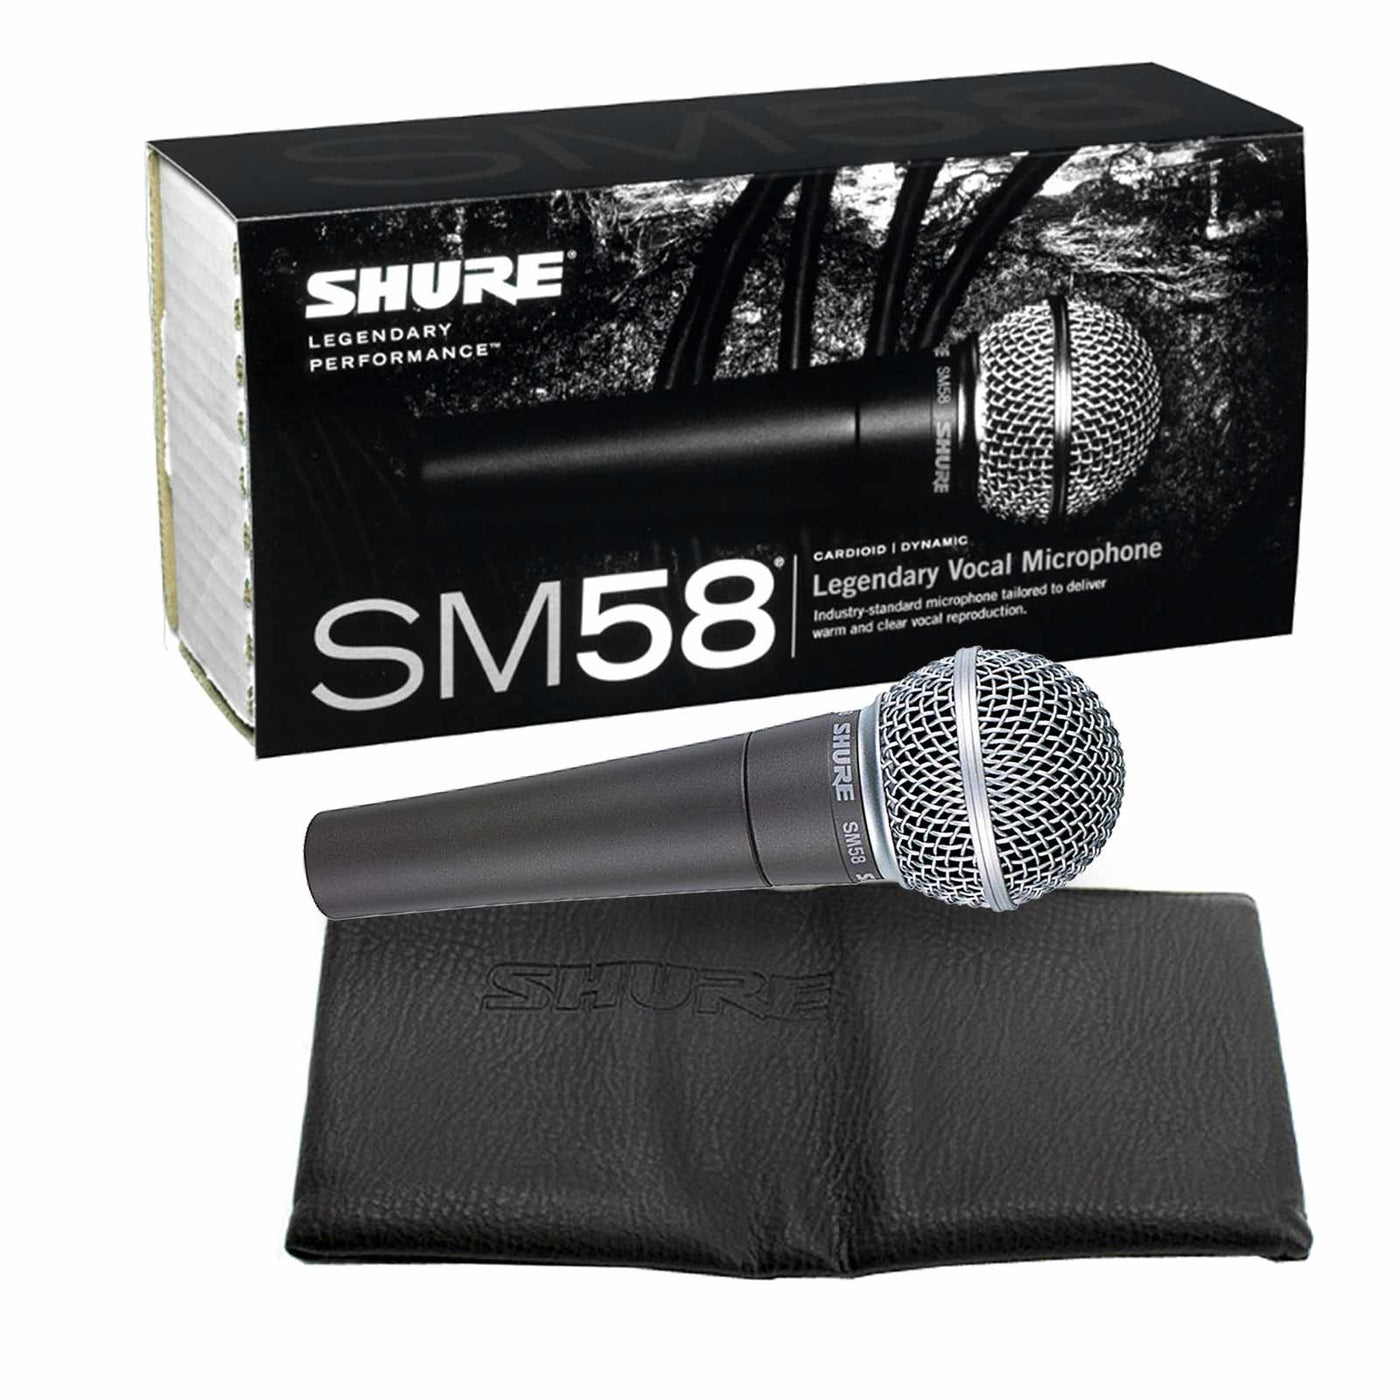 Shure SM58 Vocal Microphone Has Its Own Day of Celebration